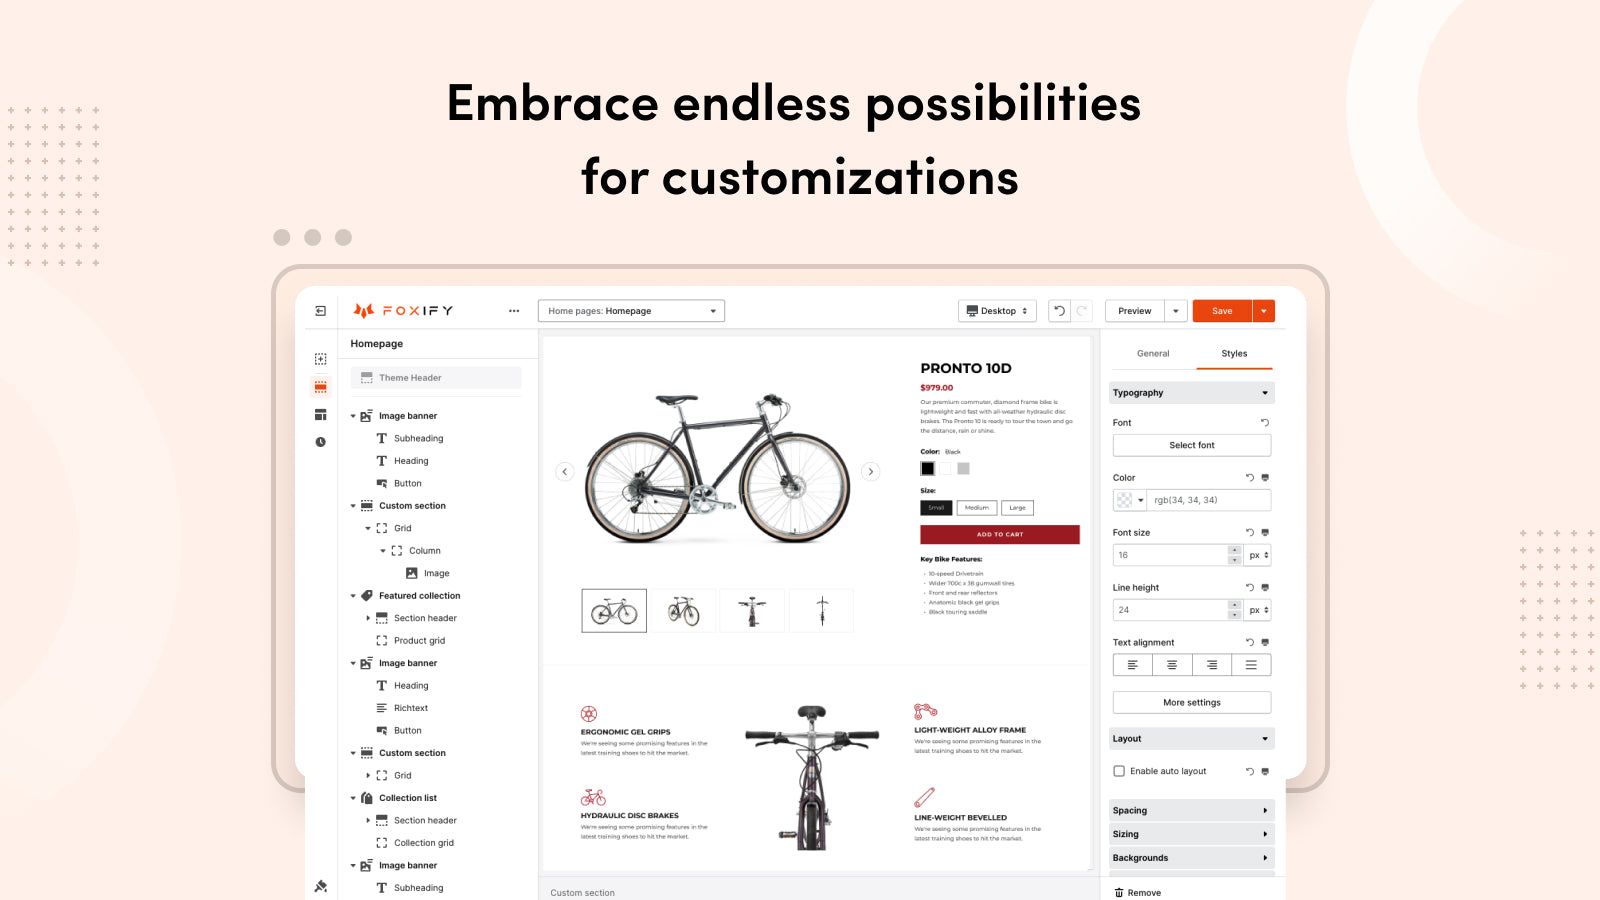 Embrace endless possibilities for customizations